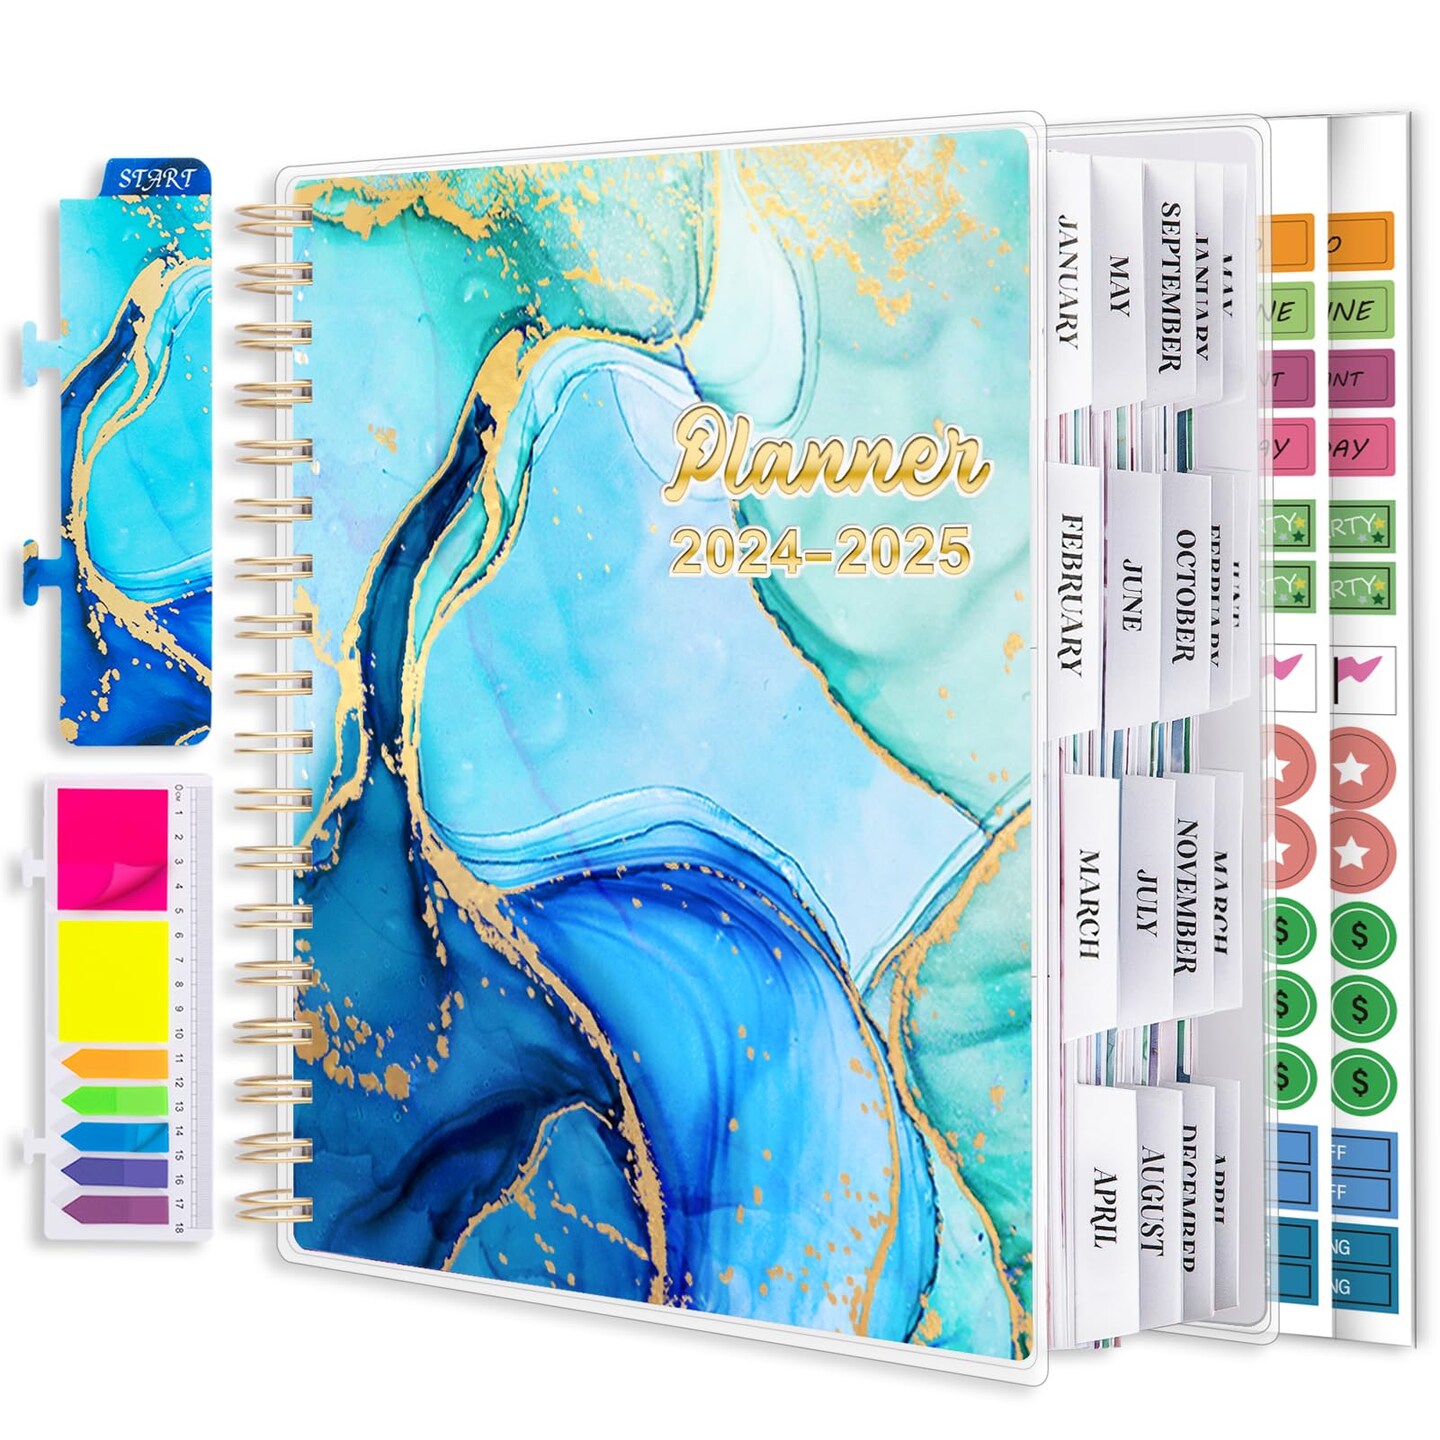 Montcool Planner 2024-2025 7.9 x 9.8, Large 18 Months Daily